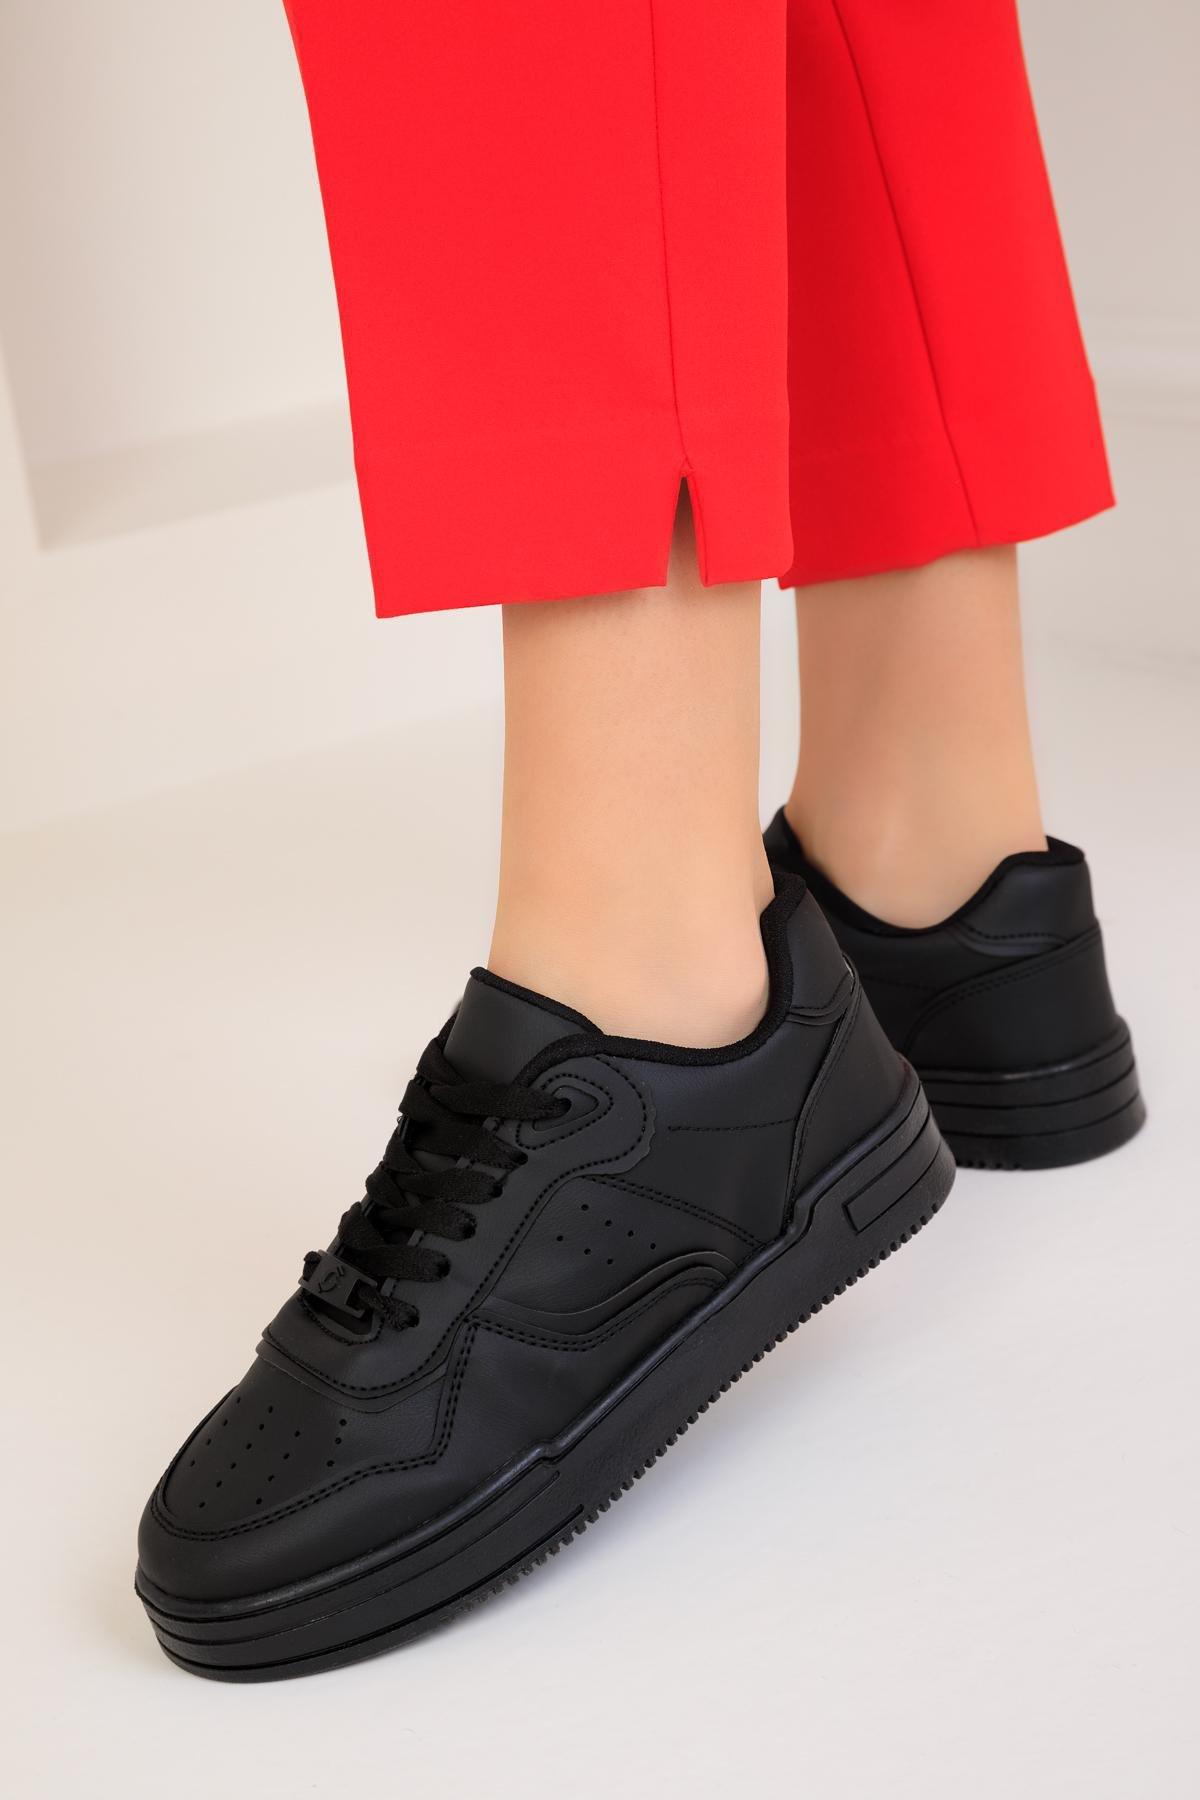 SOHO - Black Laced Sneakers